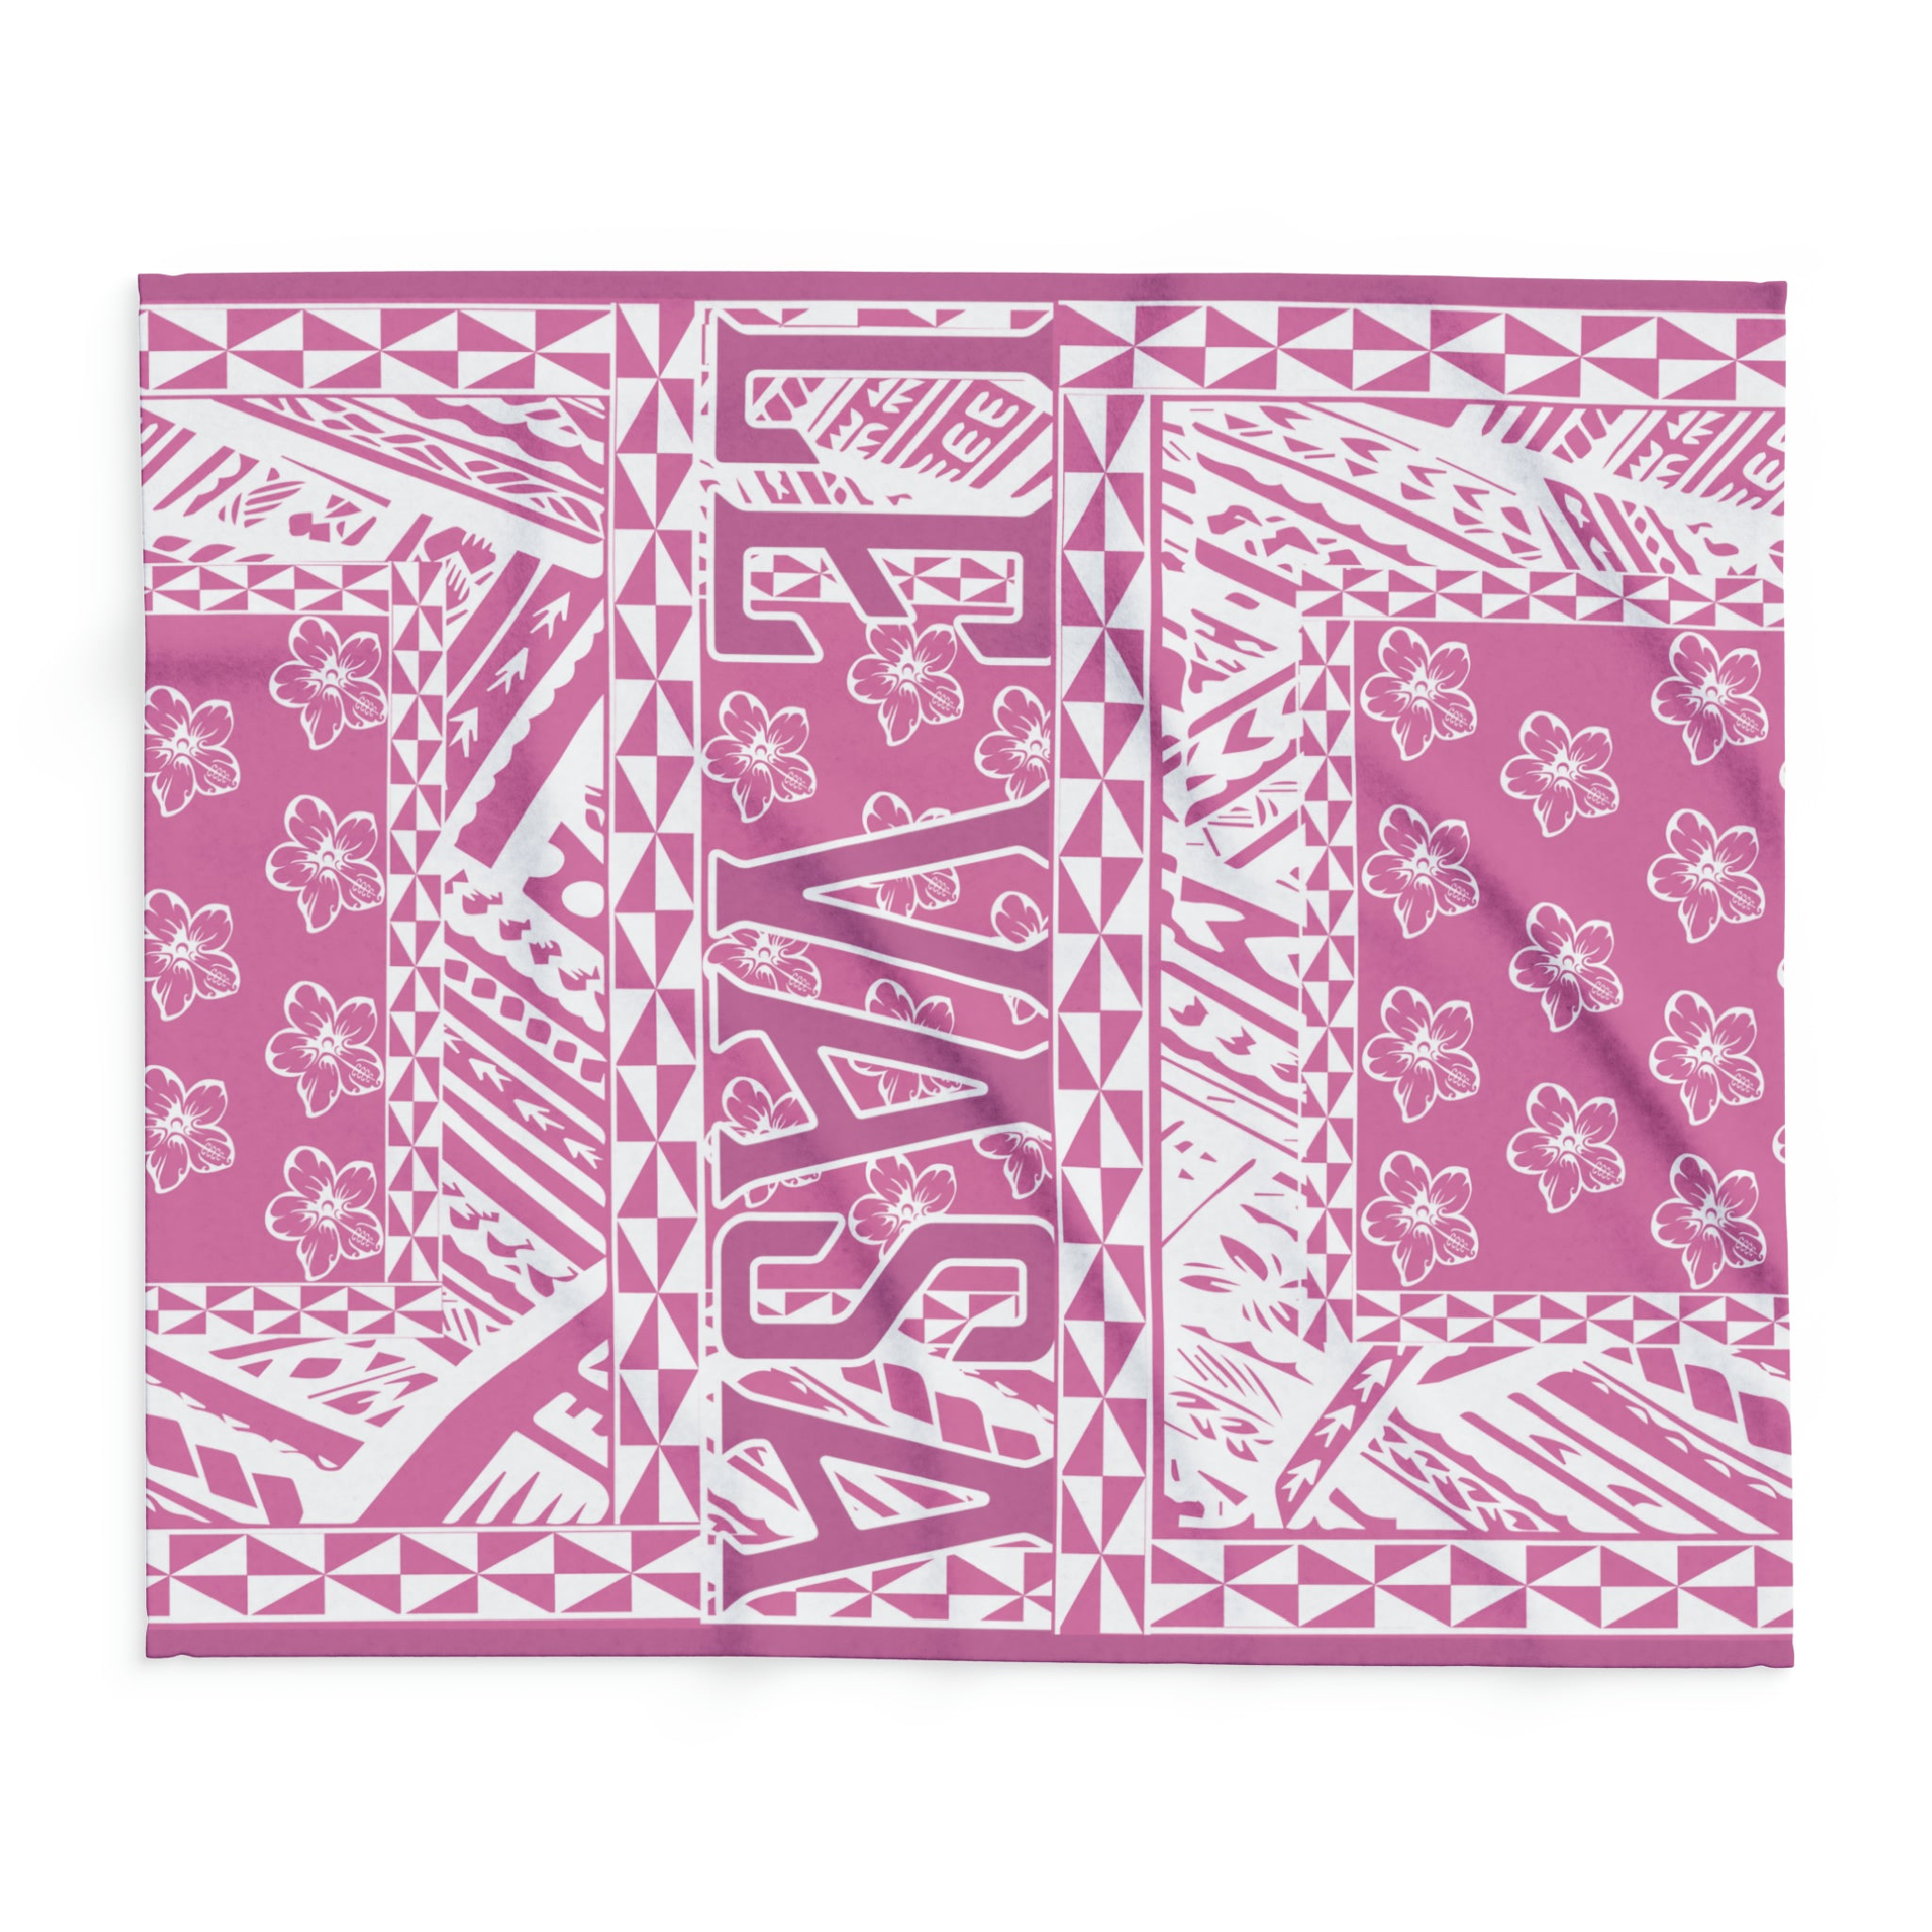 South Pac Paisley Blanket Pink